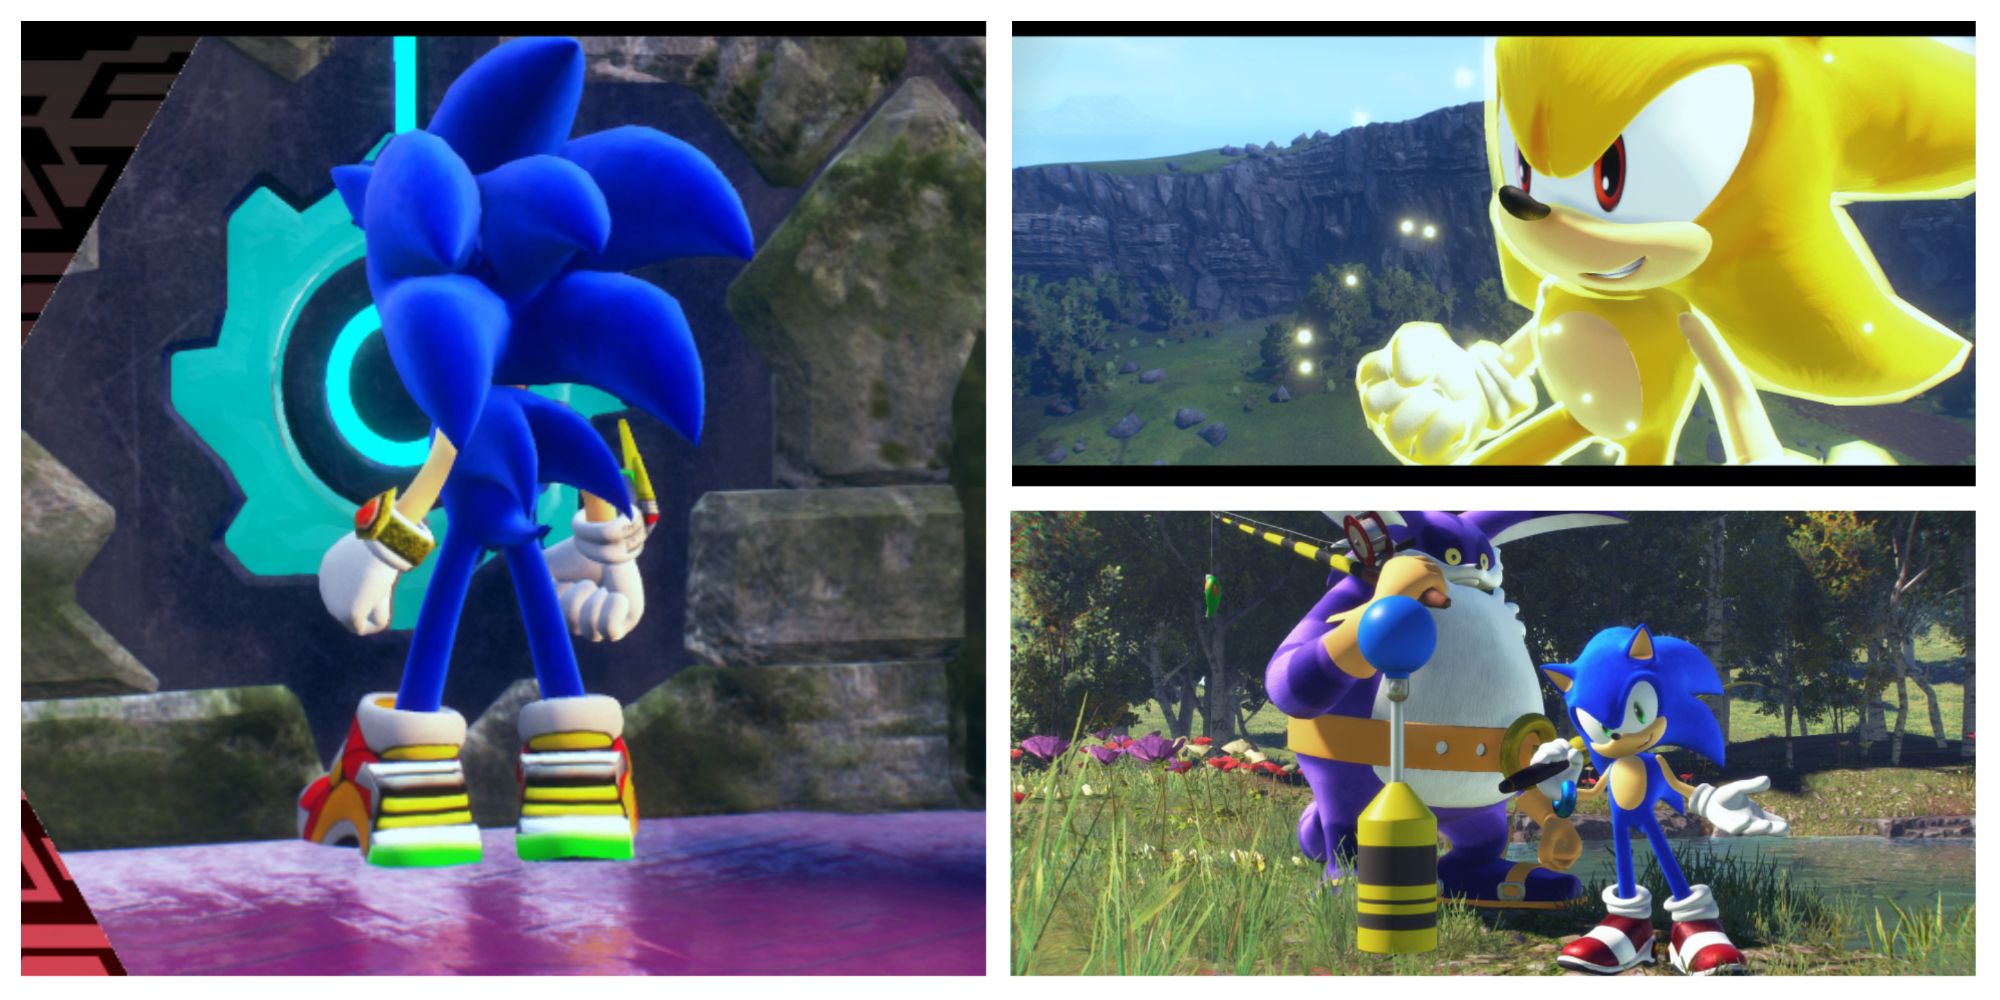 Left: Back view of Sonic in his Sonic Adventure 2 gear. Top-right: Super Sonic. Bottom-right: Big the Cat and Sonic. Image source: Gamebanana.com